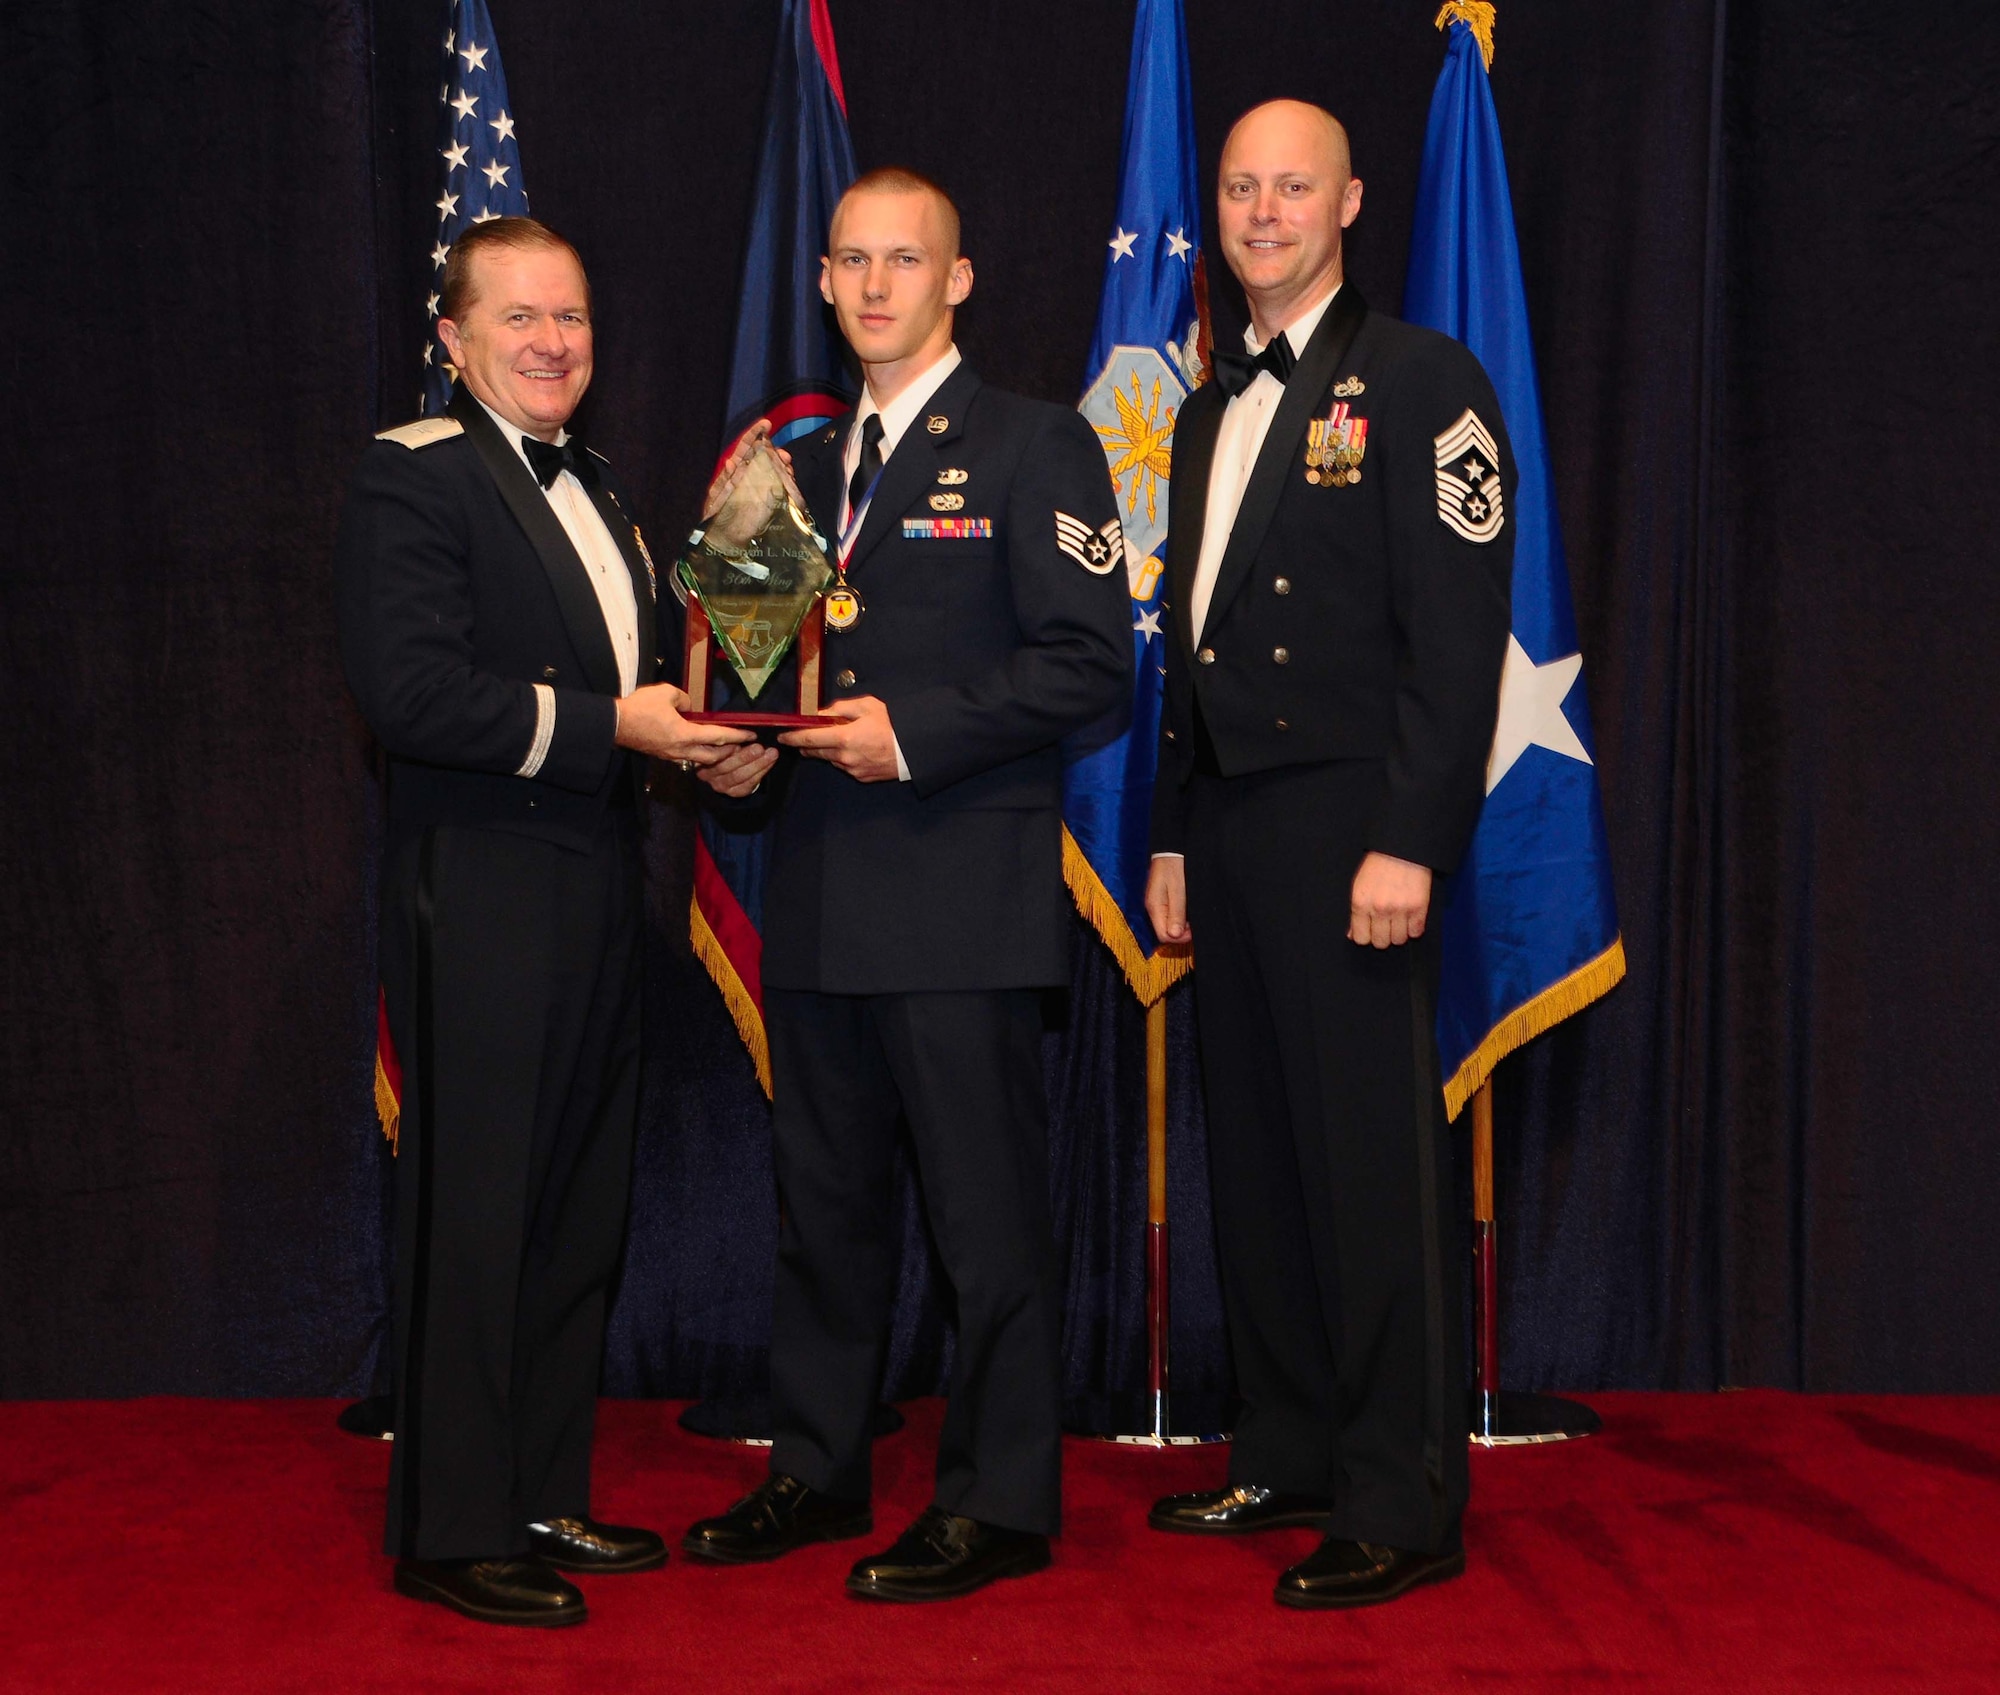 ANDERSEN AIR FORCE BASE, Guam - Airman of the Year winner Senior Amn. Bryan Nagy,  36th Contingency Response Group, is congratulated by Brig. Gen. Phil Ruhlman, Commander, 36th Wing, and Command Chief Master Sgt. Allen Mullinex during the Feb. 19 Annual Award ceremony.( U.S. Air Force photo by Airman 1st Class Jeffrey Schultze)